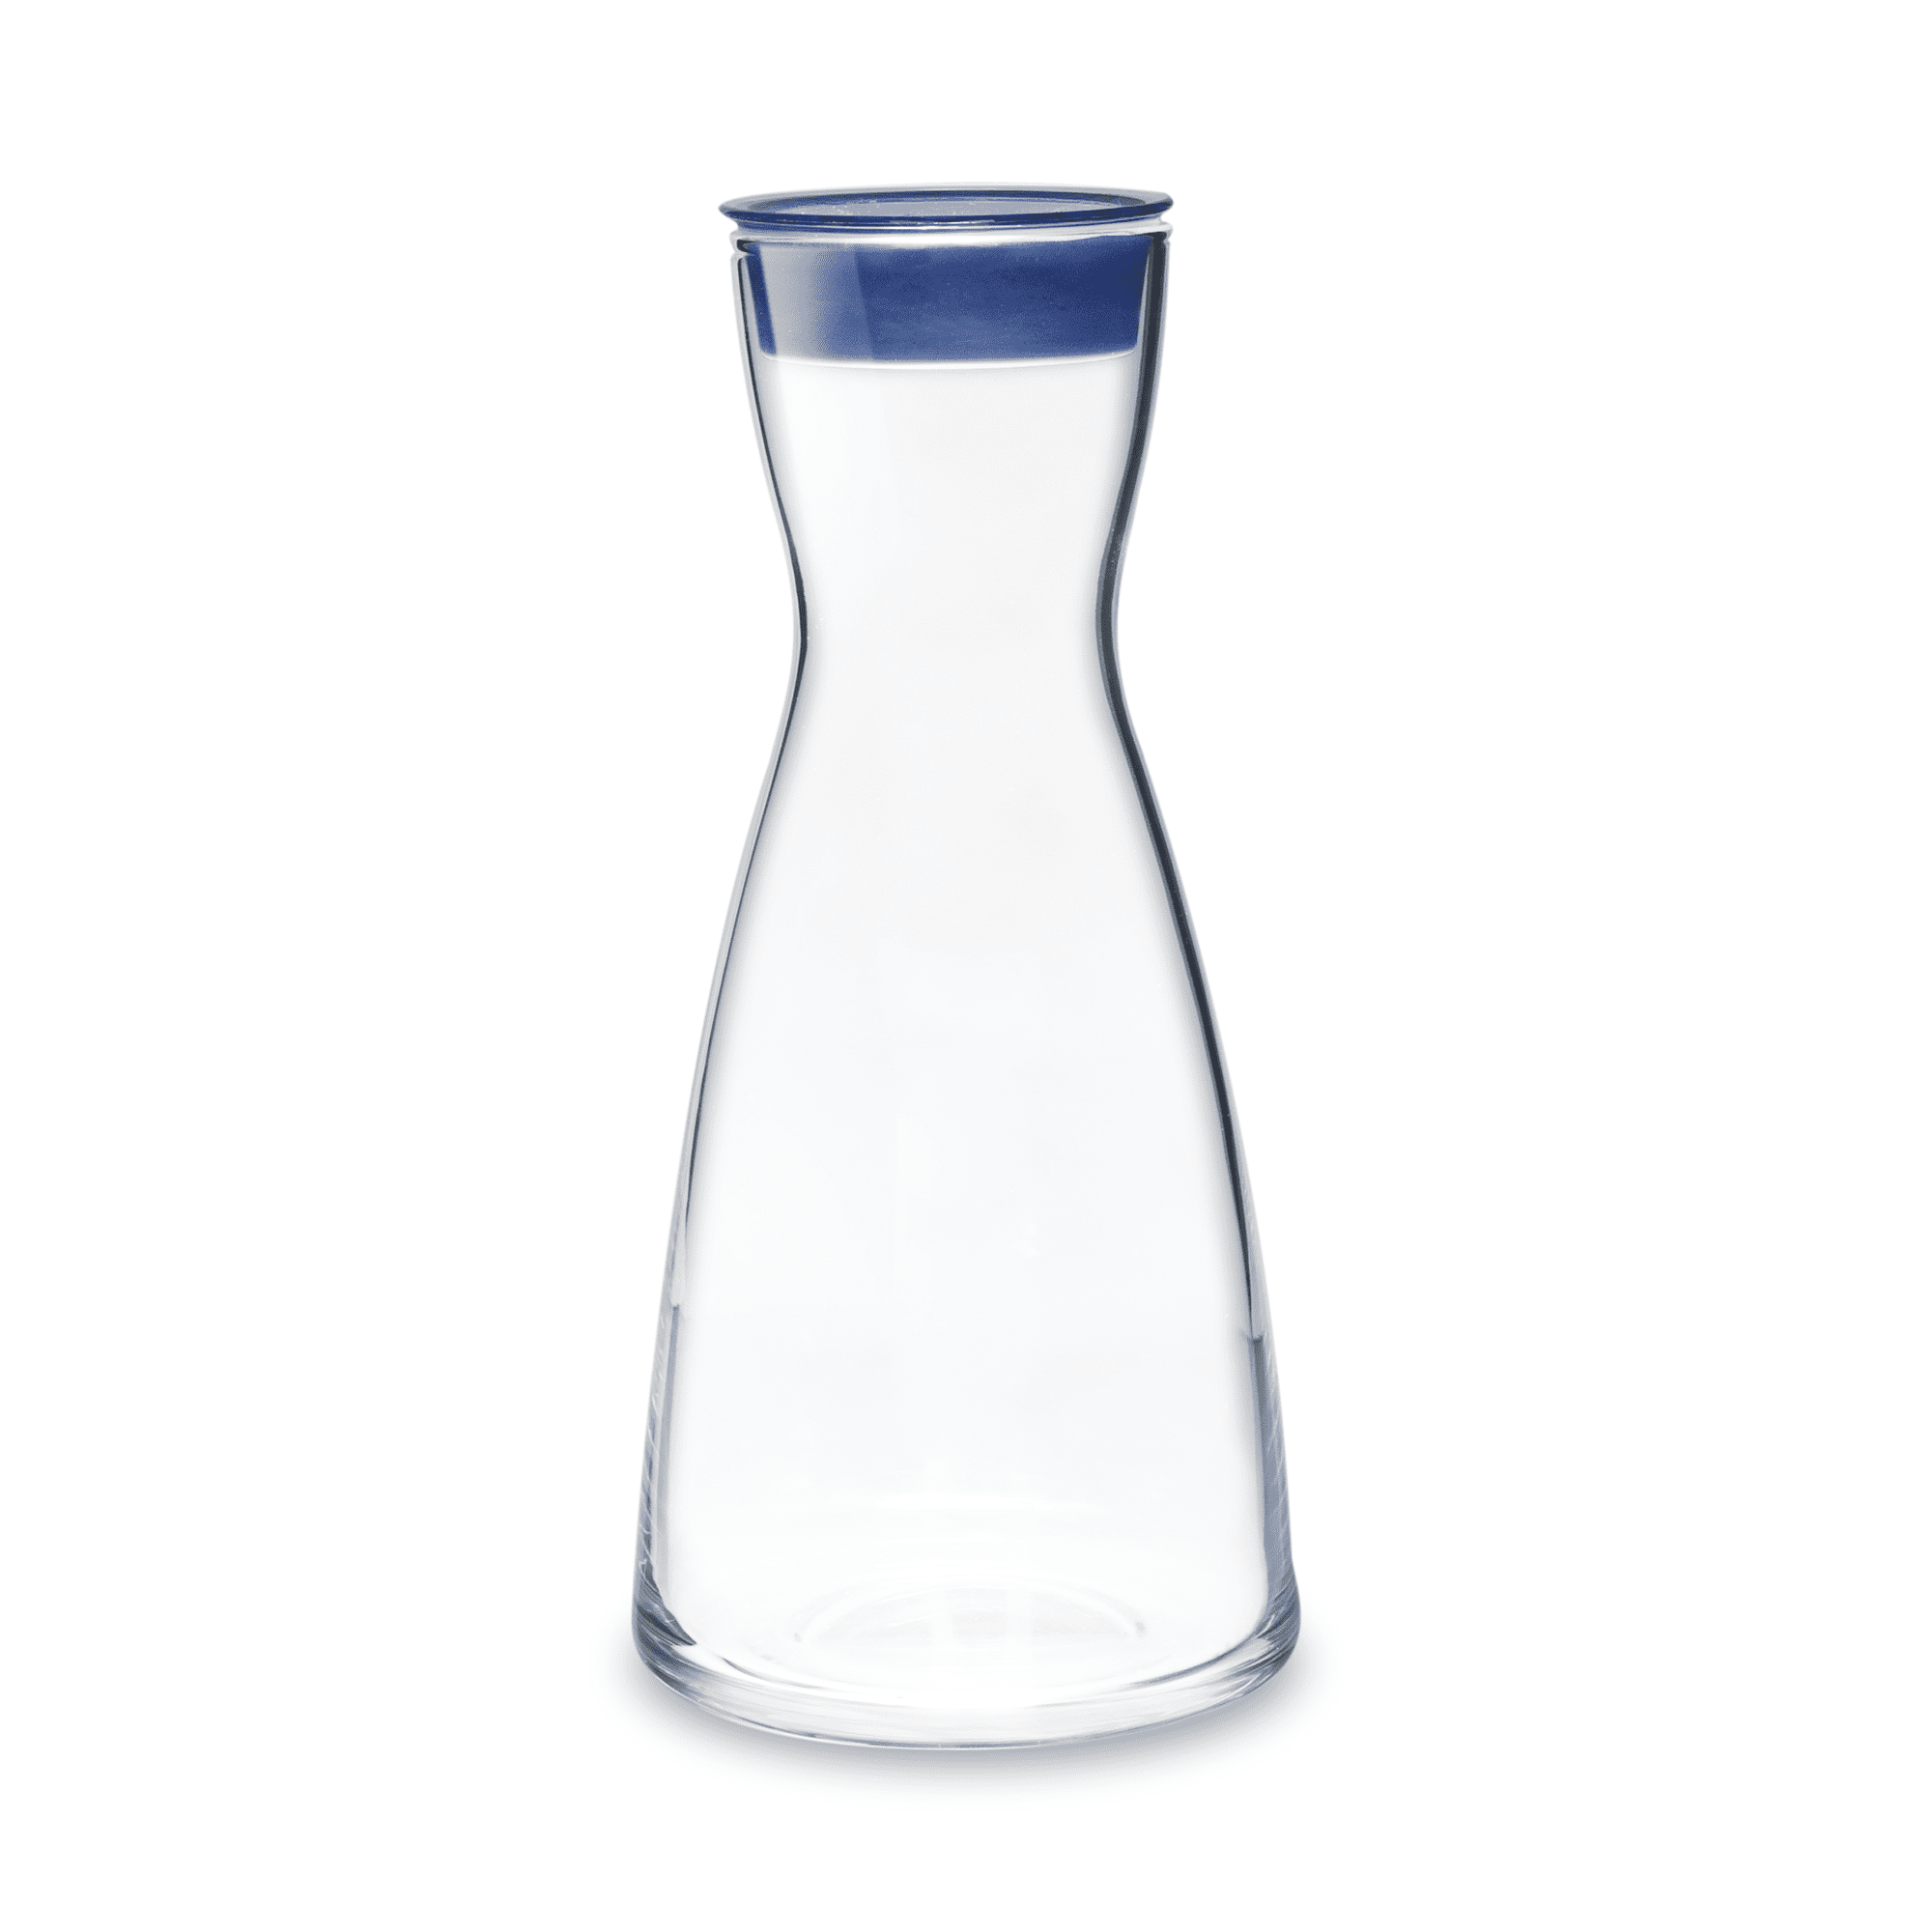 UPKOCH Water Glass Carafe with Lid 600ml Juice Beverage Pitcher Bottle for  Ice Tea Party Fridge